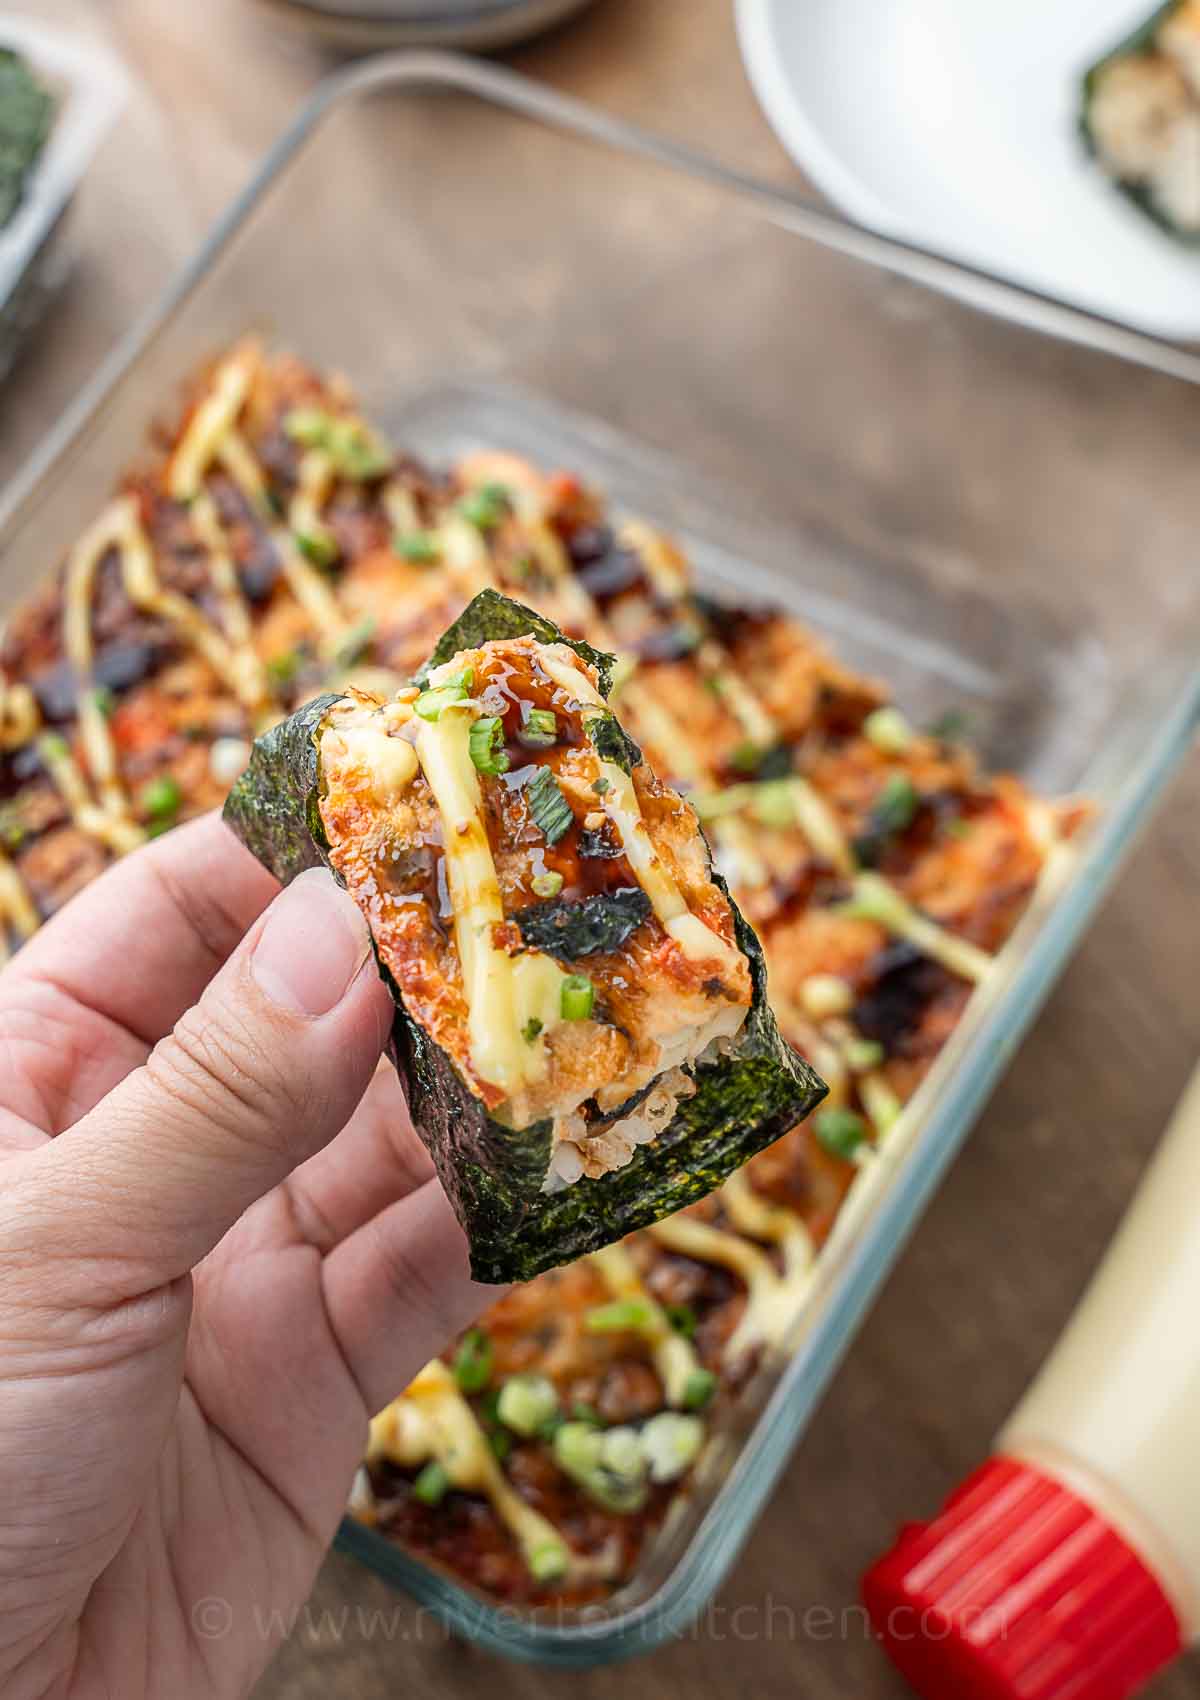 baked sushi with salmon and imitation crab in nori wrap.